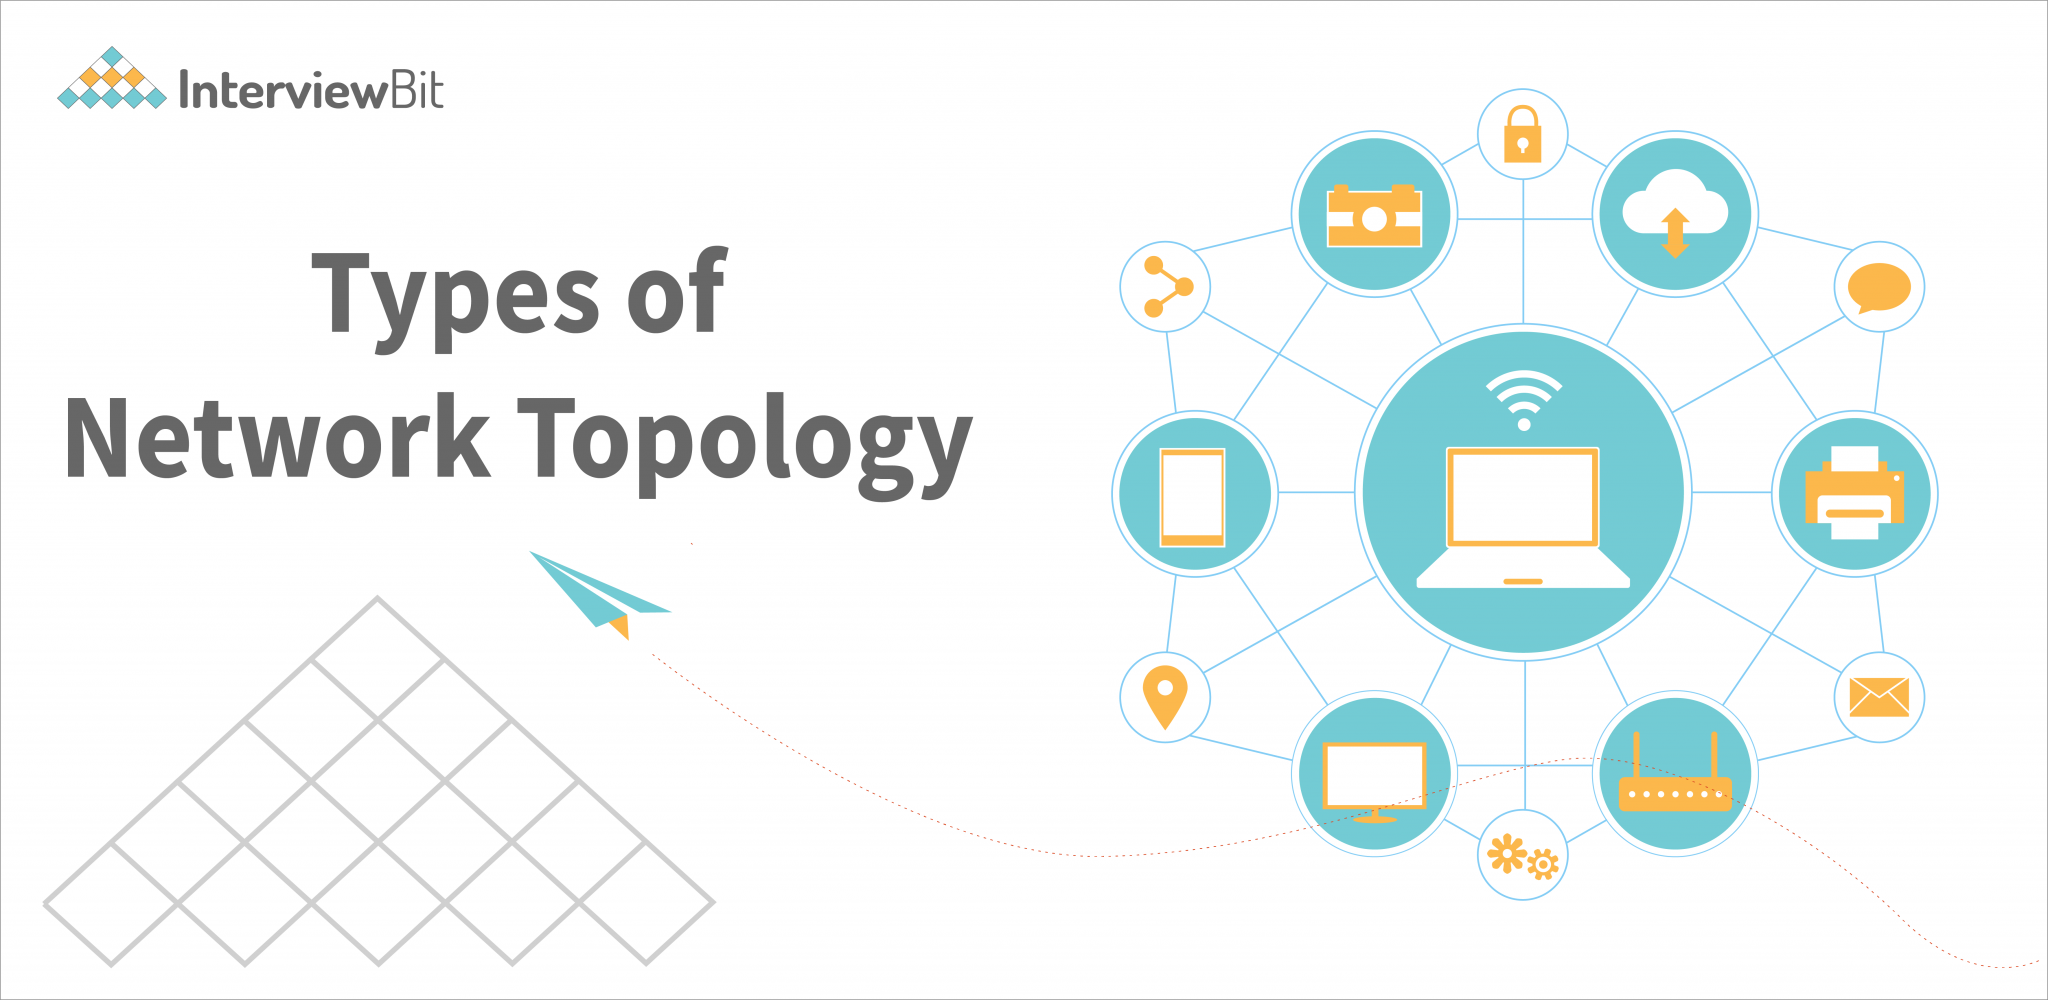 Network Topology : Key for Network Operations